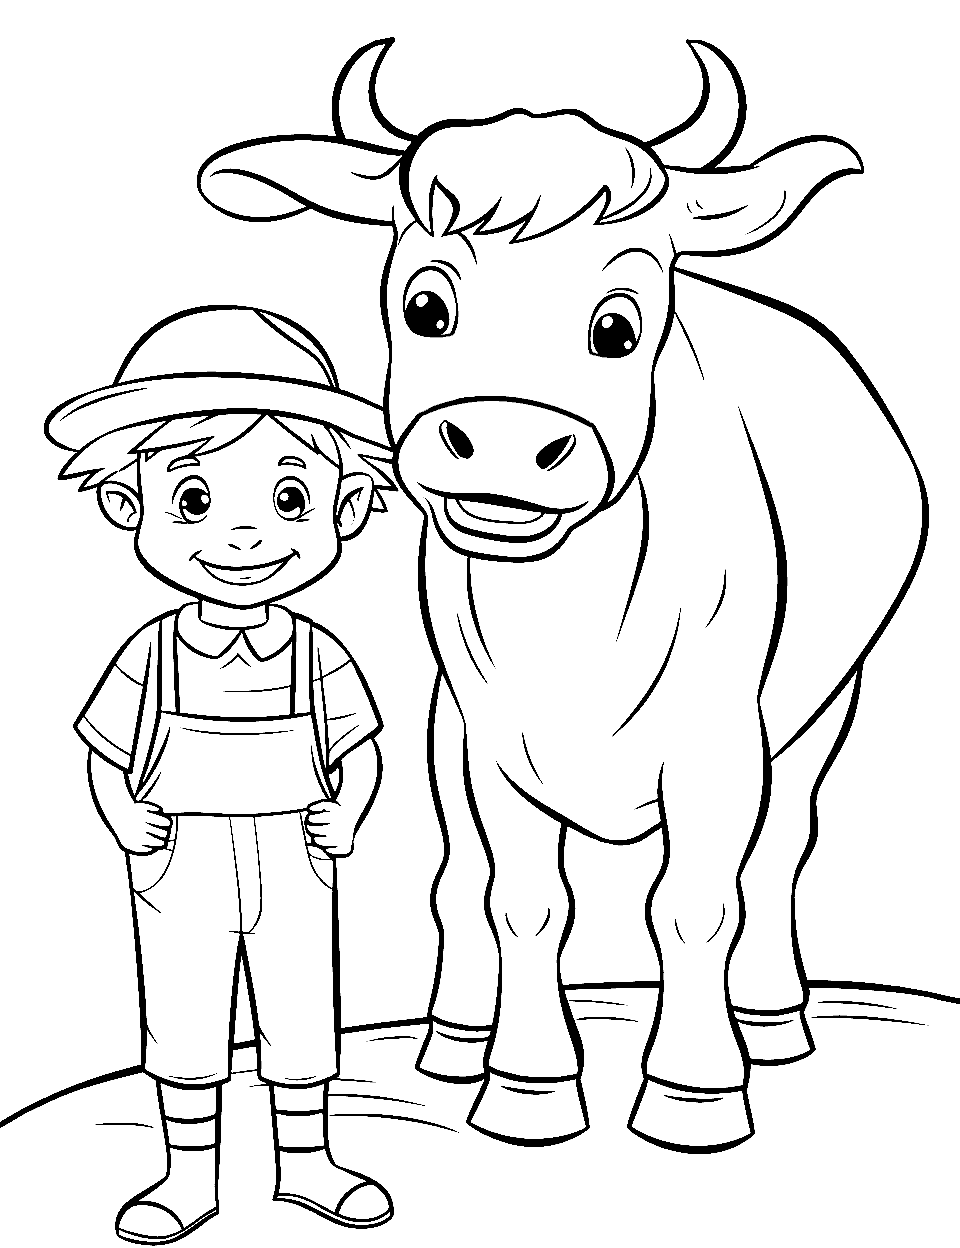 Happy Farmer’s Day Coloring Page - A cheerful farmer next to his happy cow.